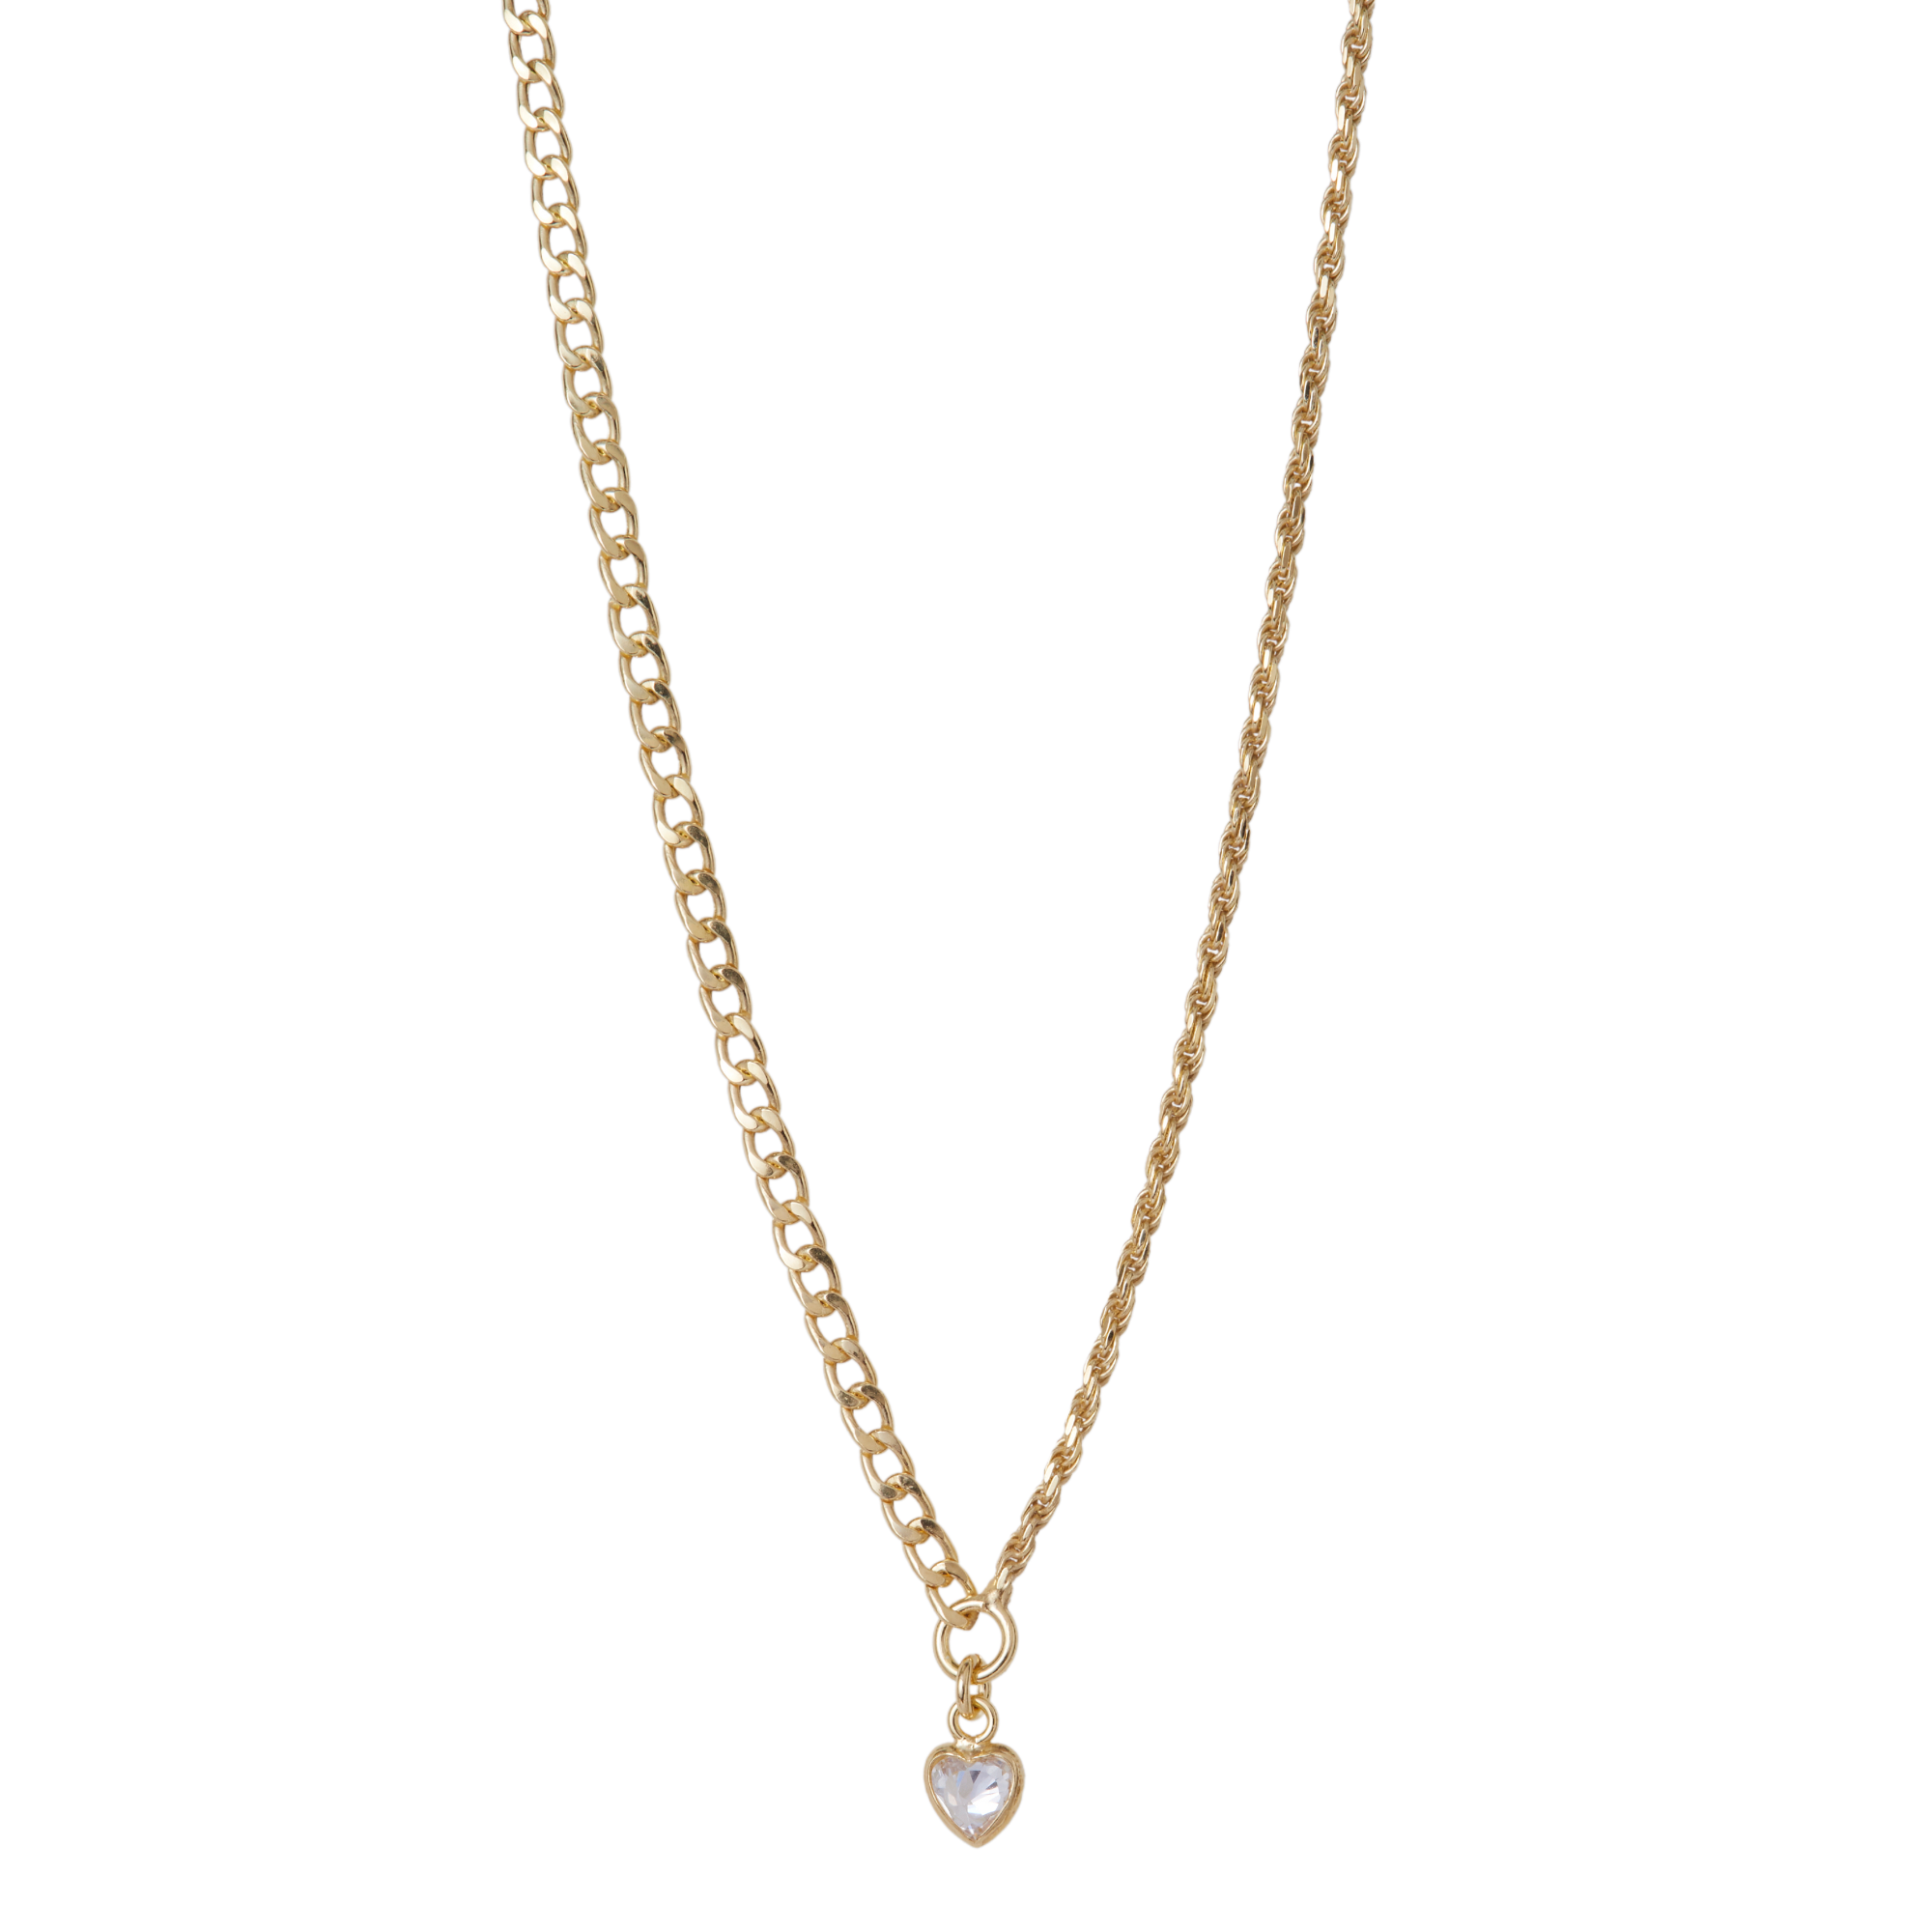 THE CZ HEART ROPE CURB NECKLACE